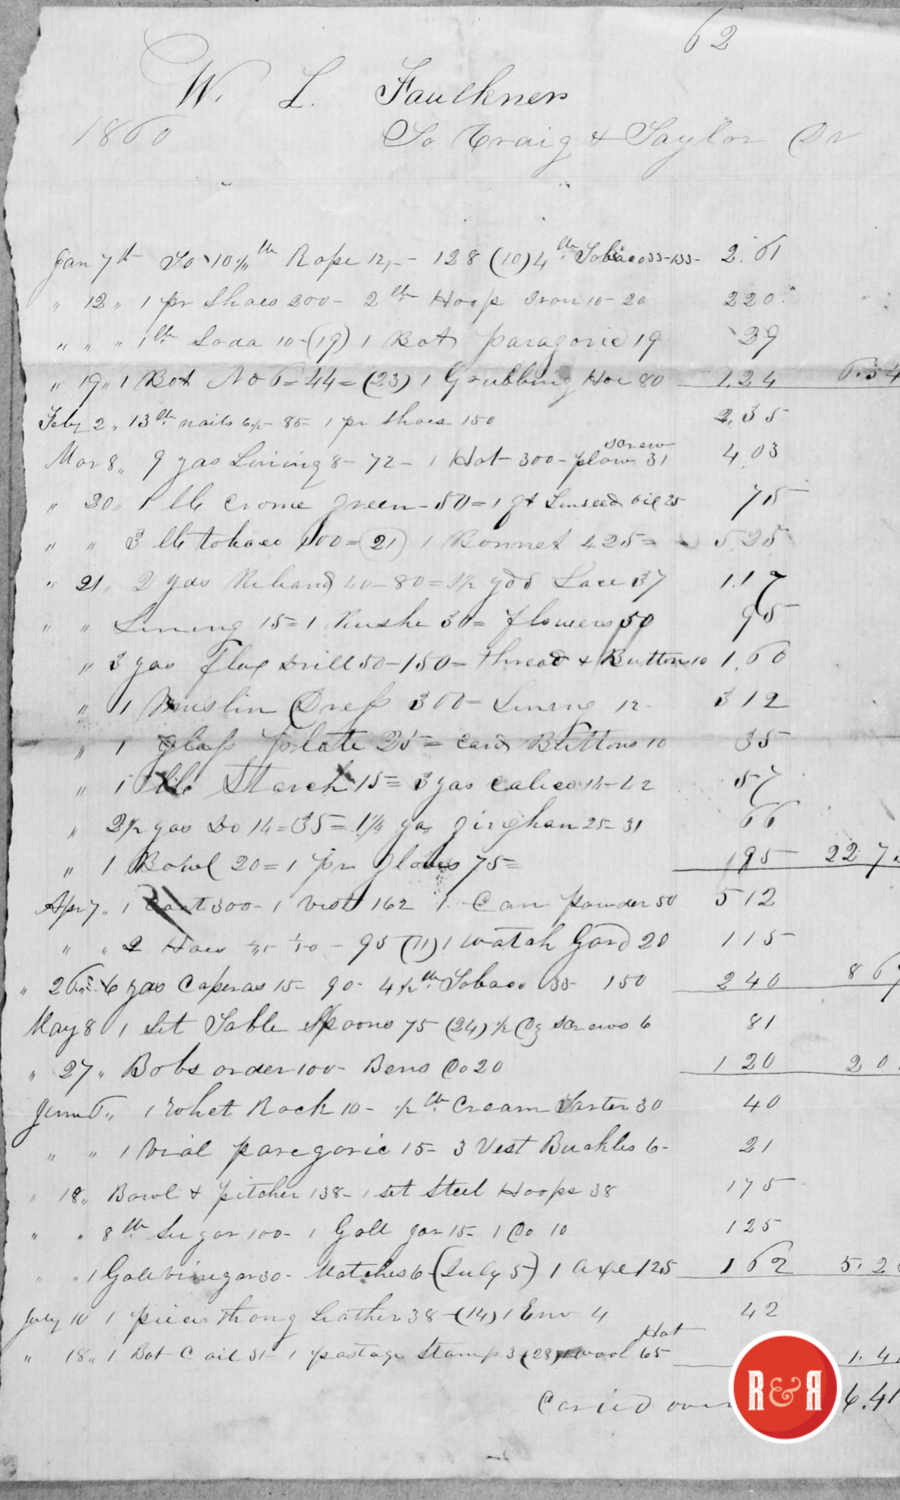 LEDGER FROM CRAIG AND TAYLOR - 1860